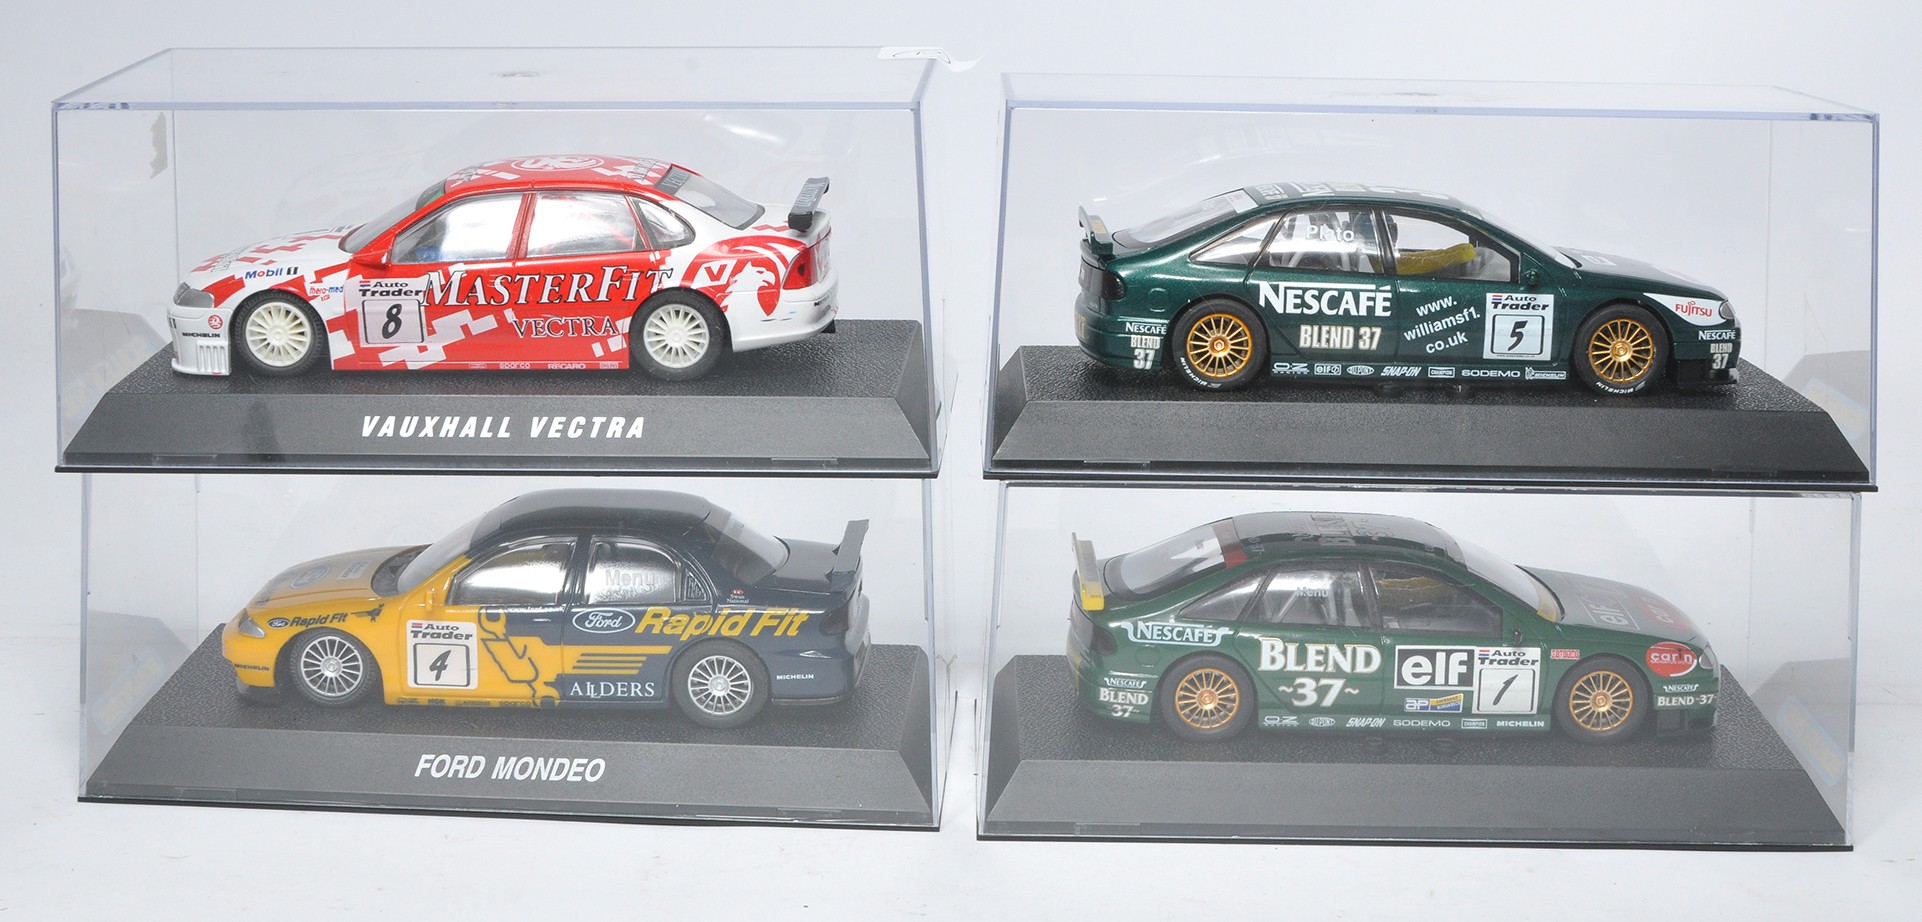 Scalextric slot car issues comprising Vauxhall Vectra, Ford Mondeo, Blend 37 Laguna plus Renault